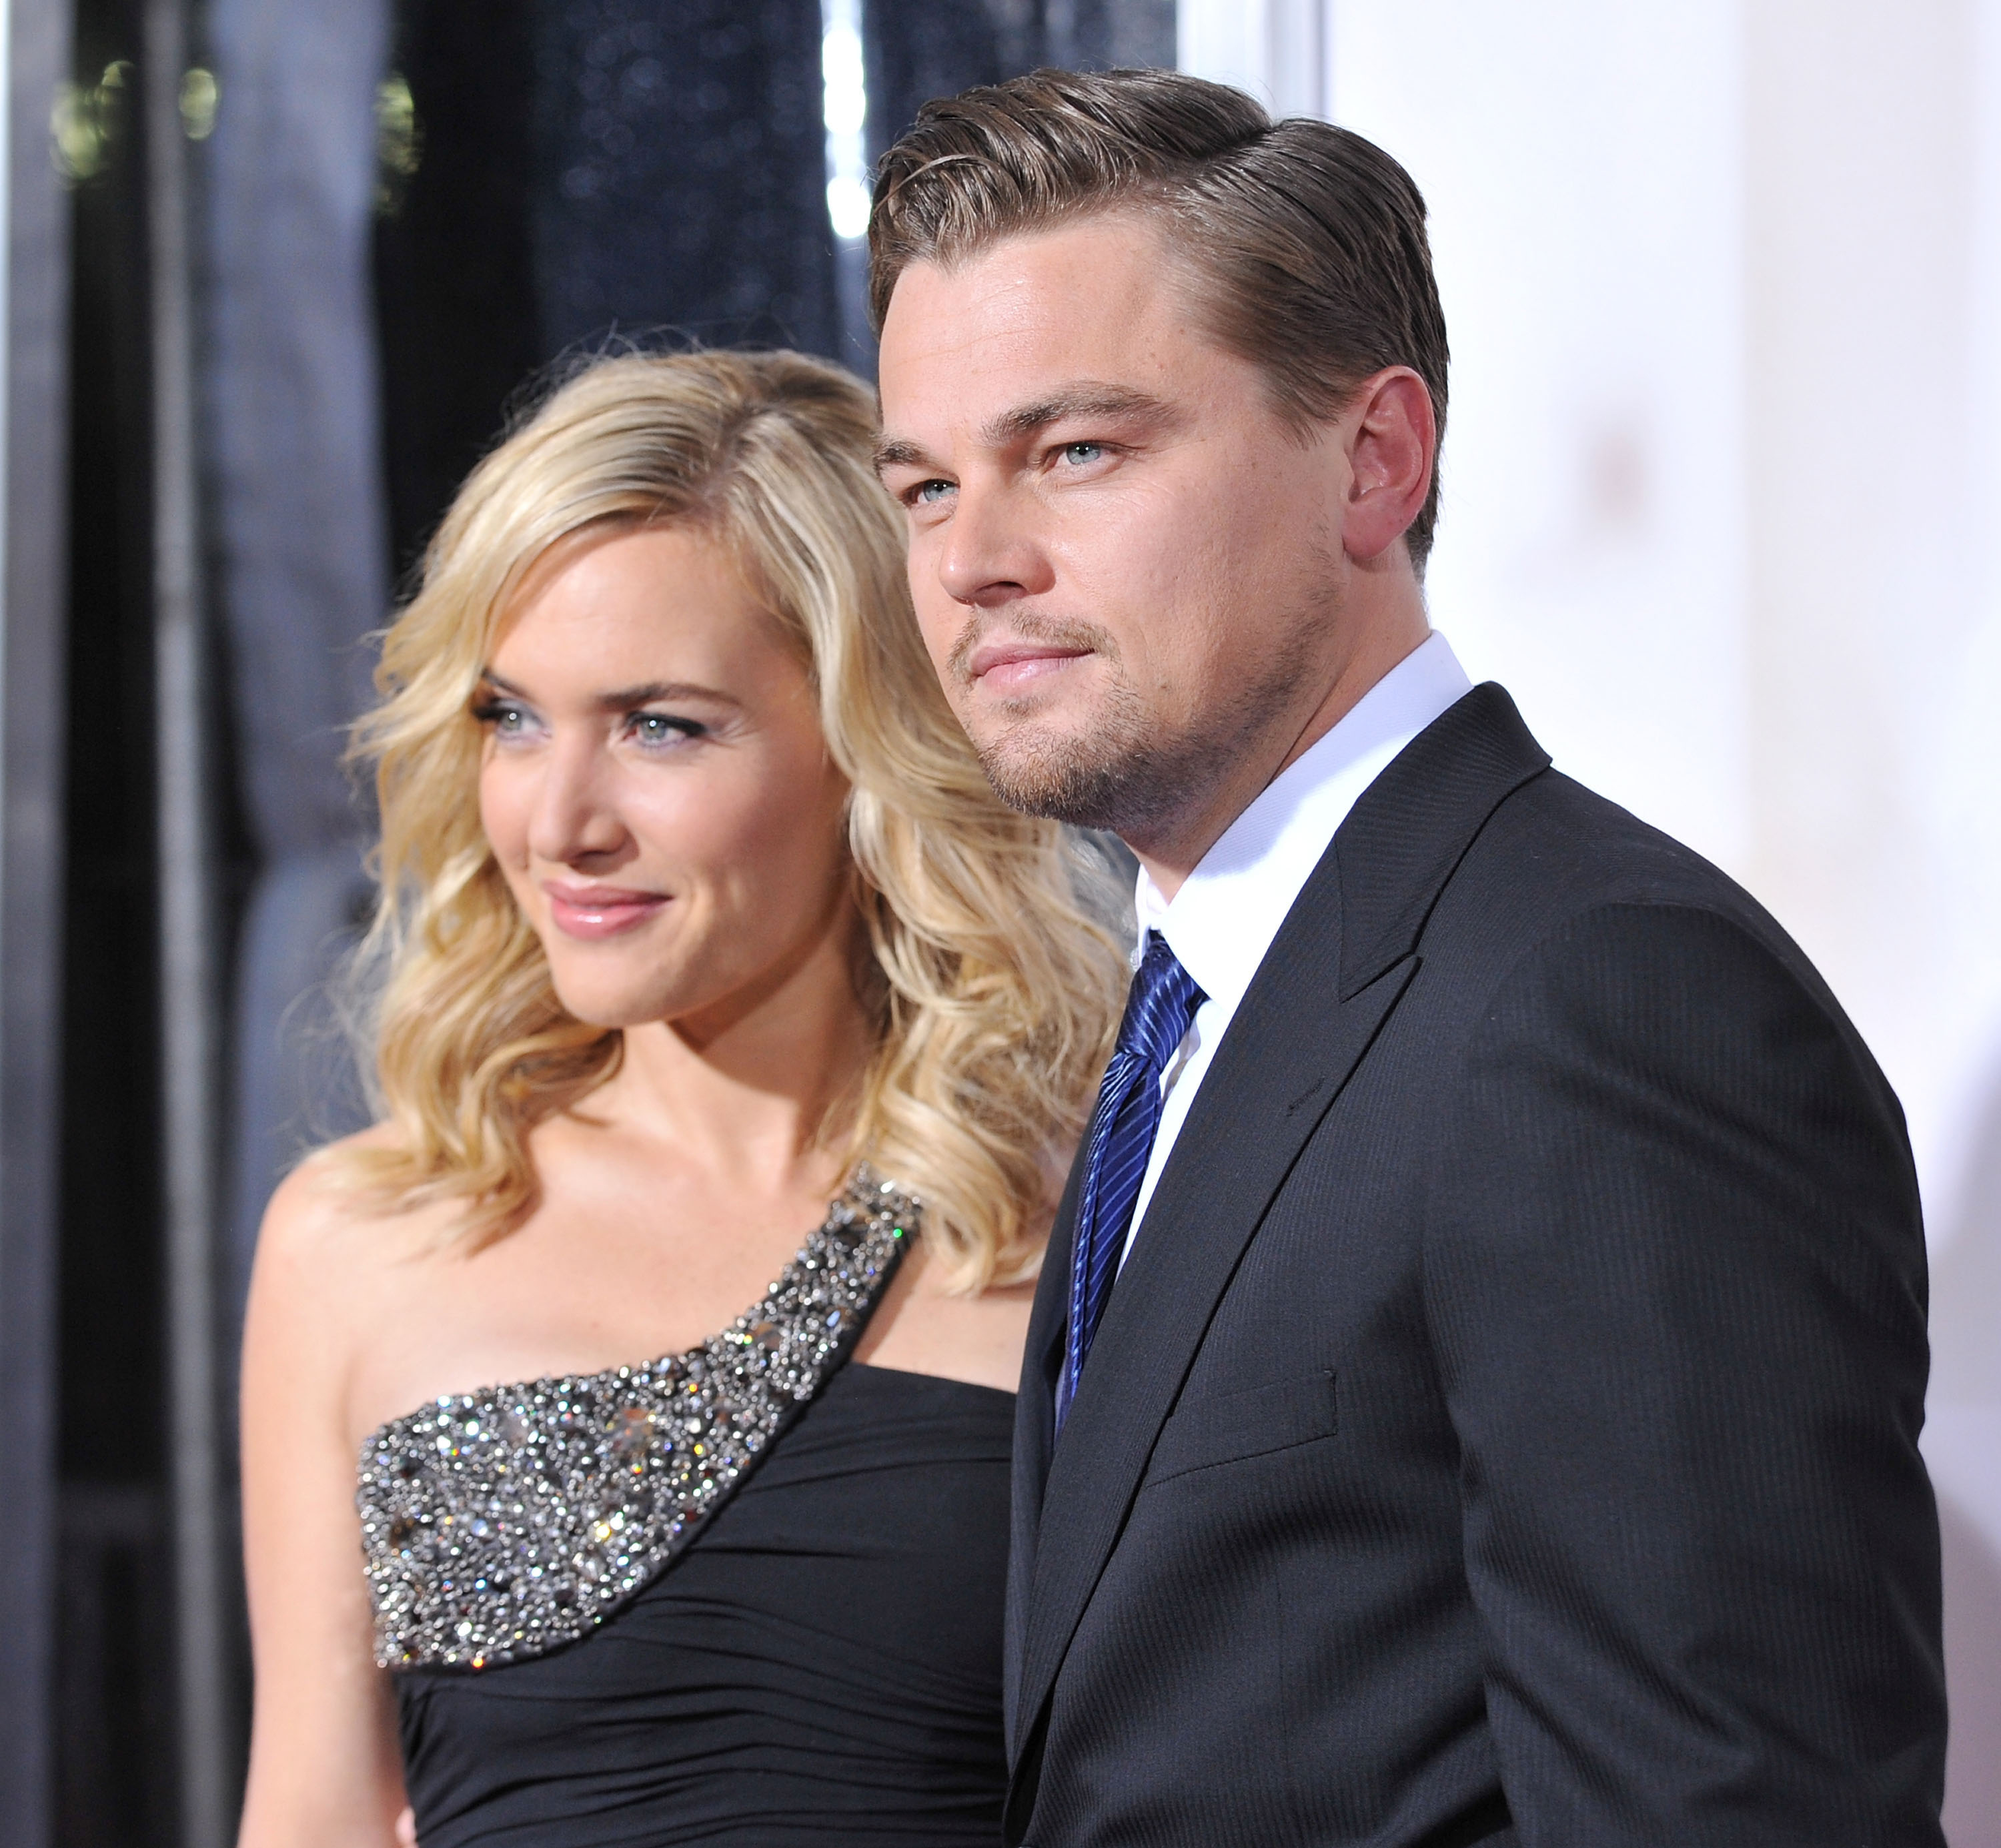 Kate and Leo at a media event